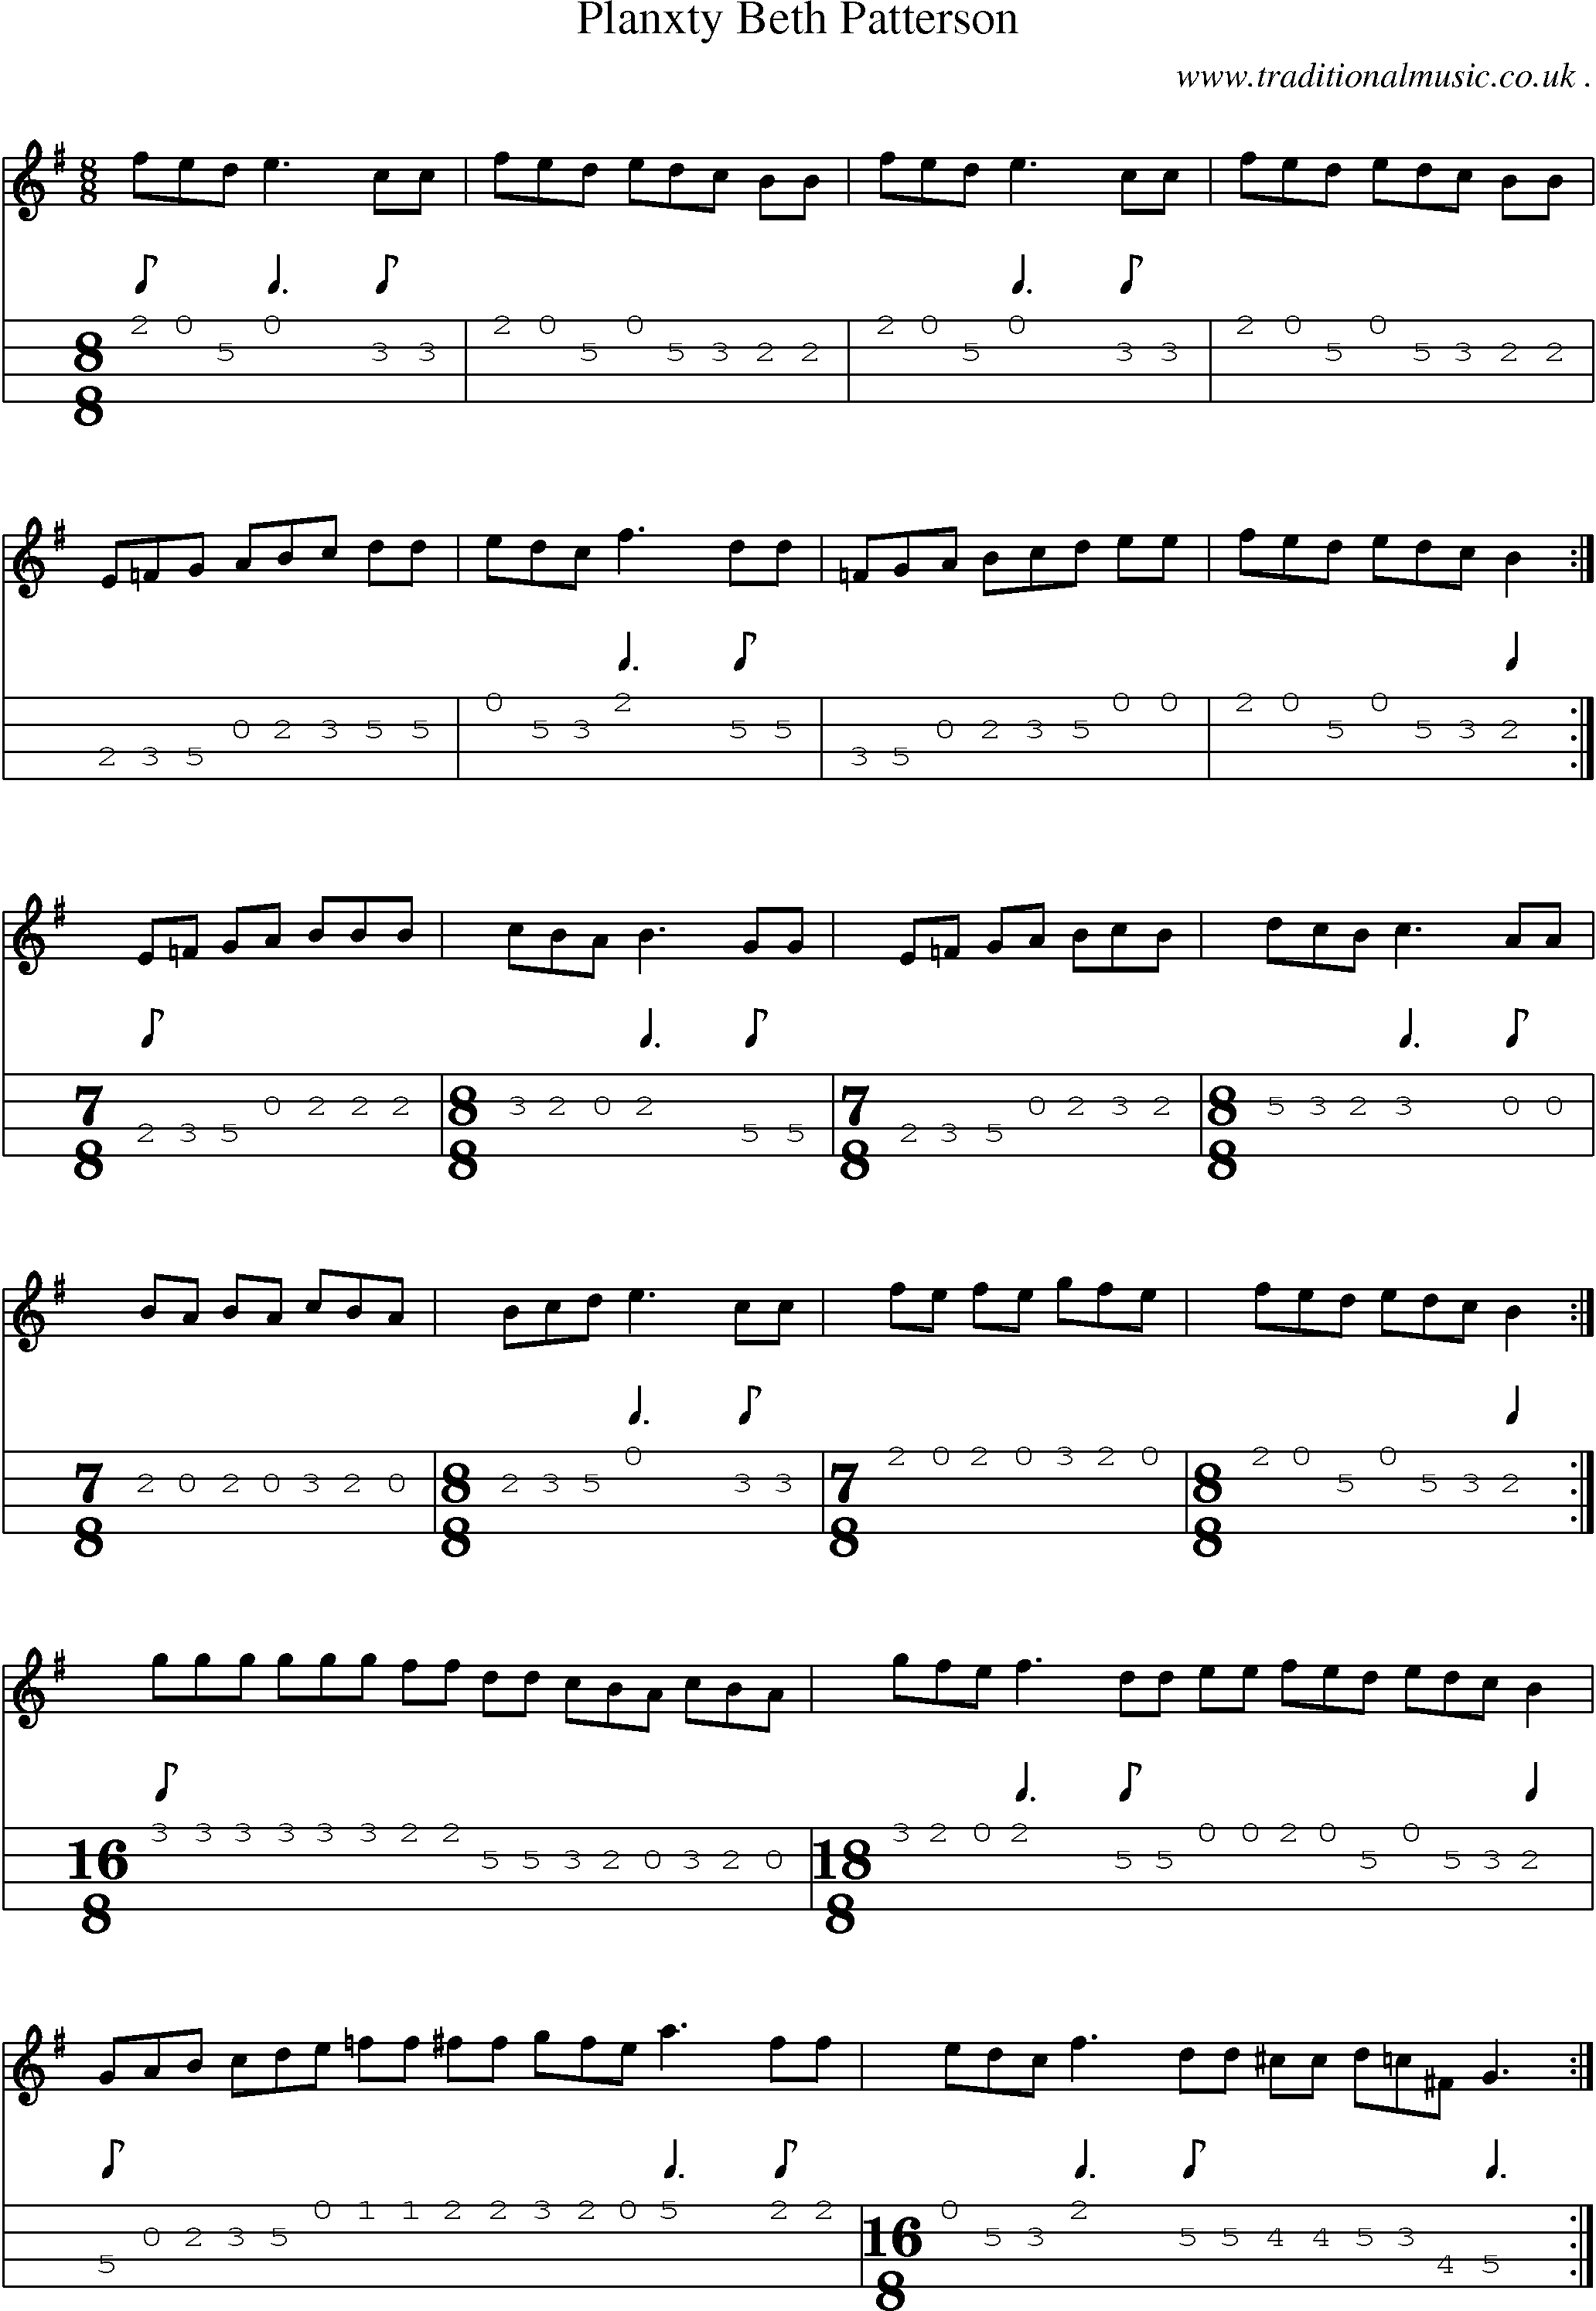 Sheet-Music and Mandolin Tabs for Planxty Beth Patterson